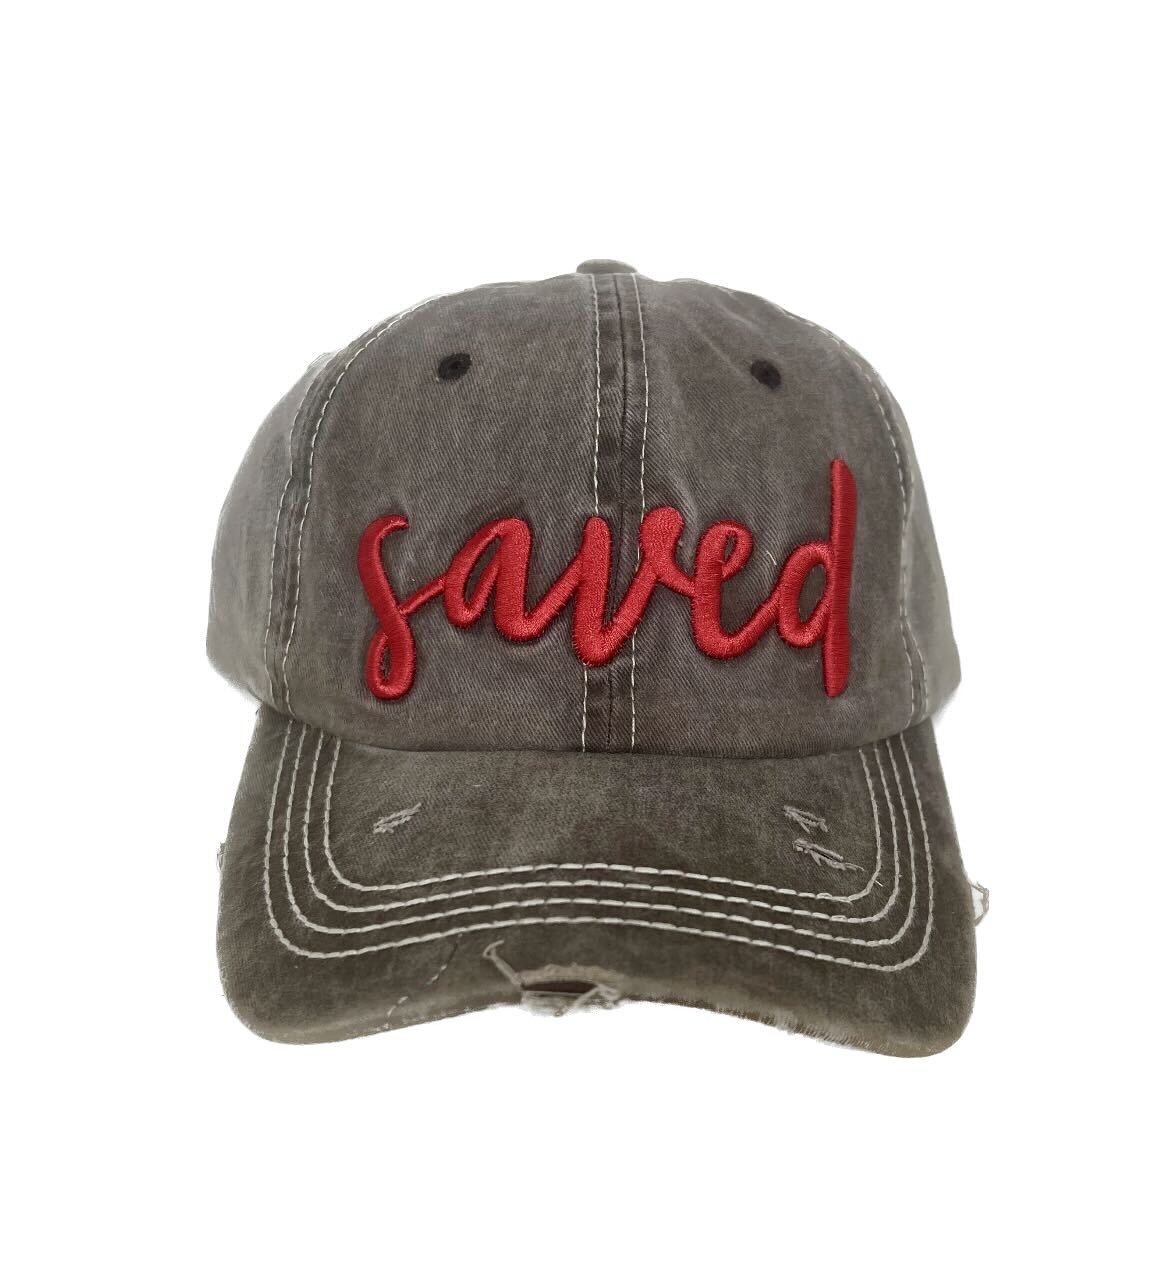 White Saved Embroidery on Brown Hat